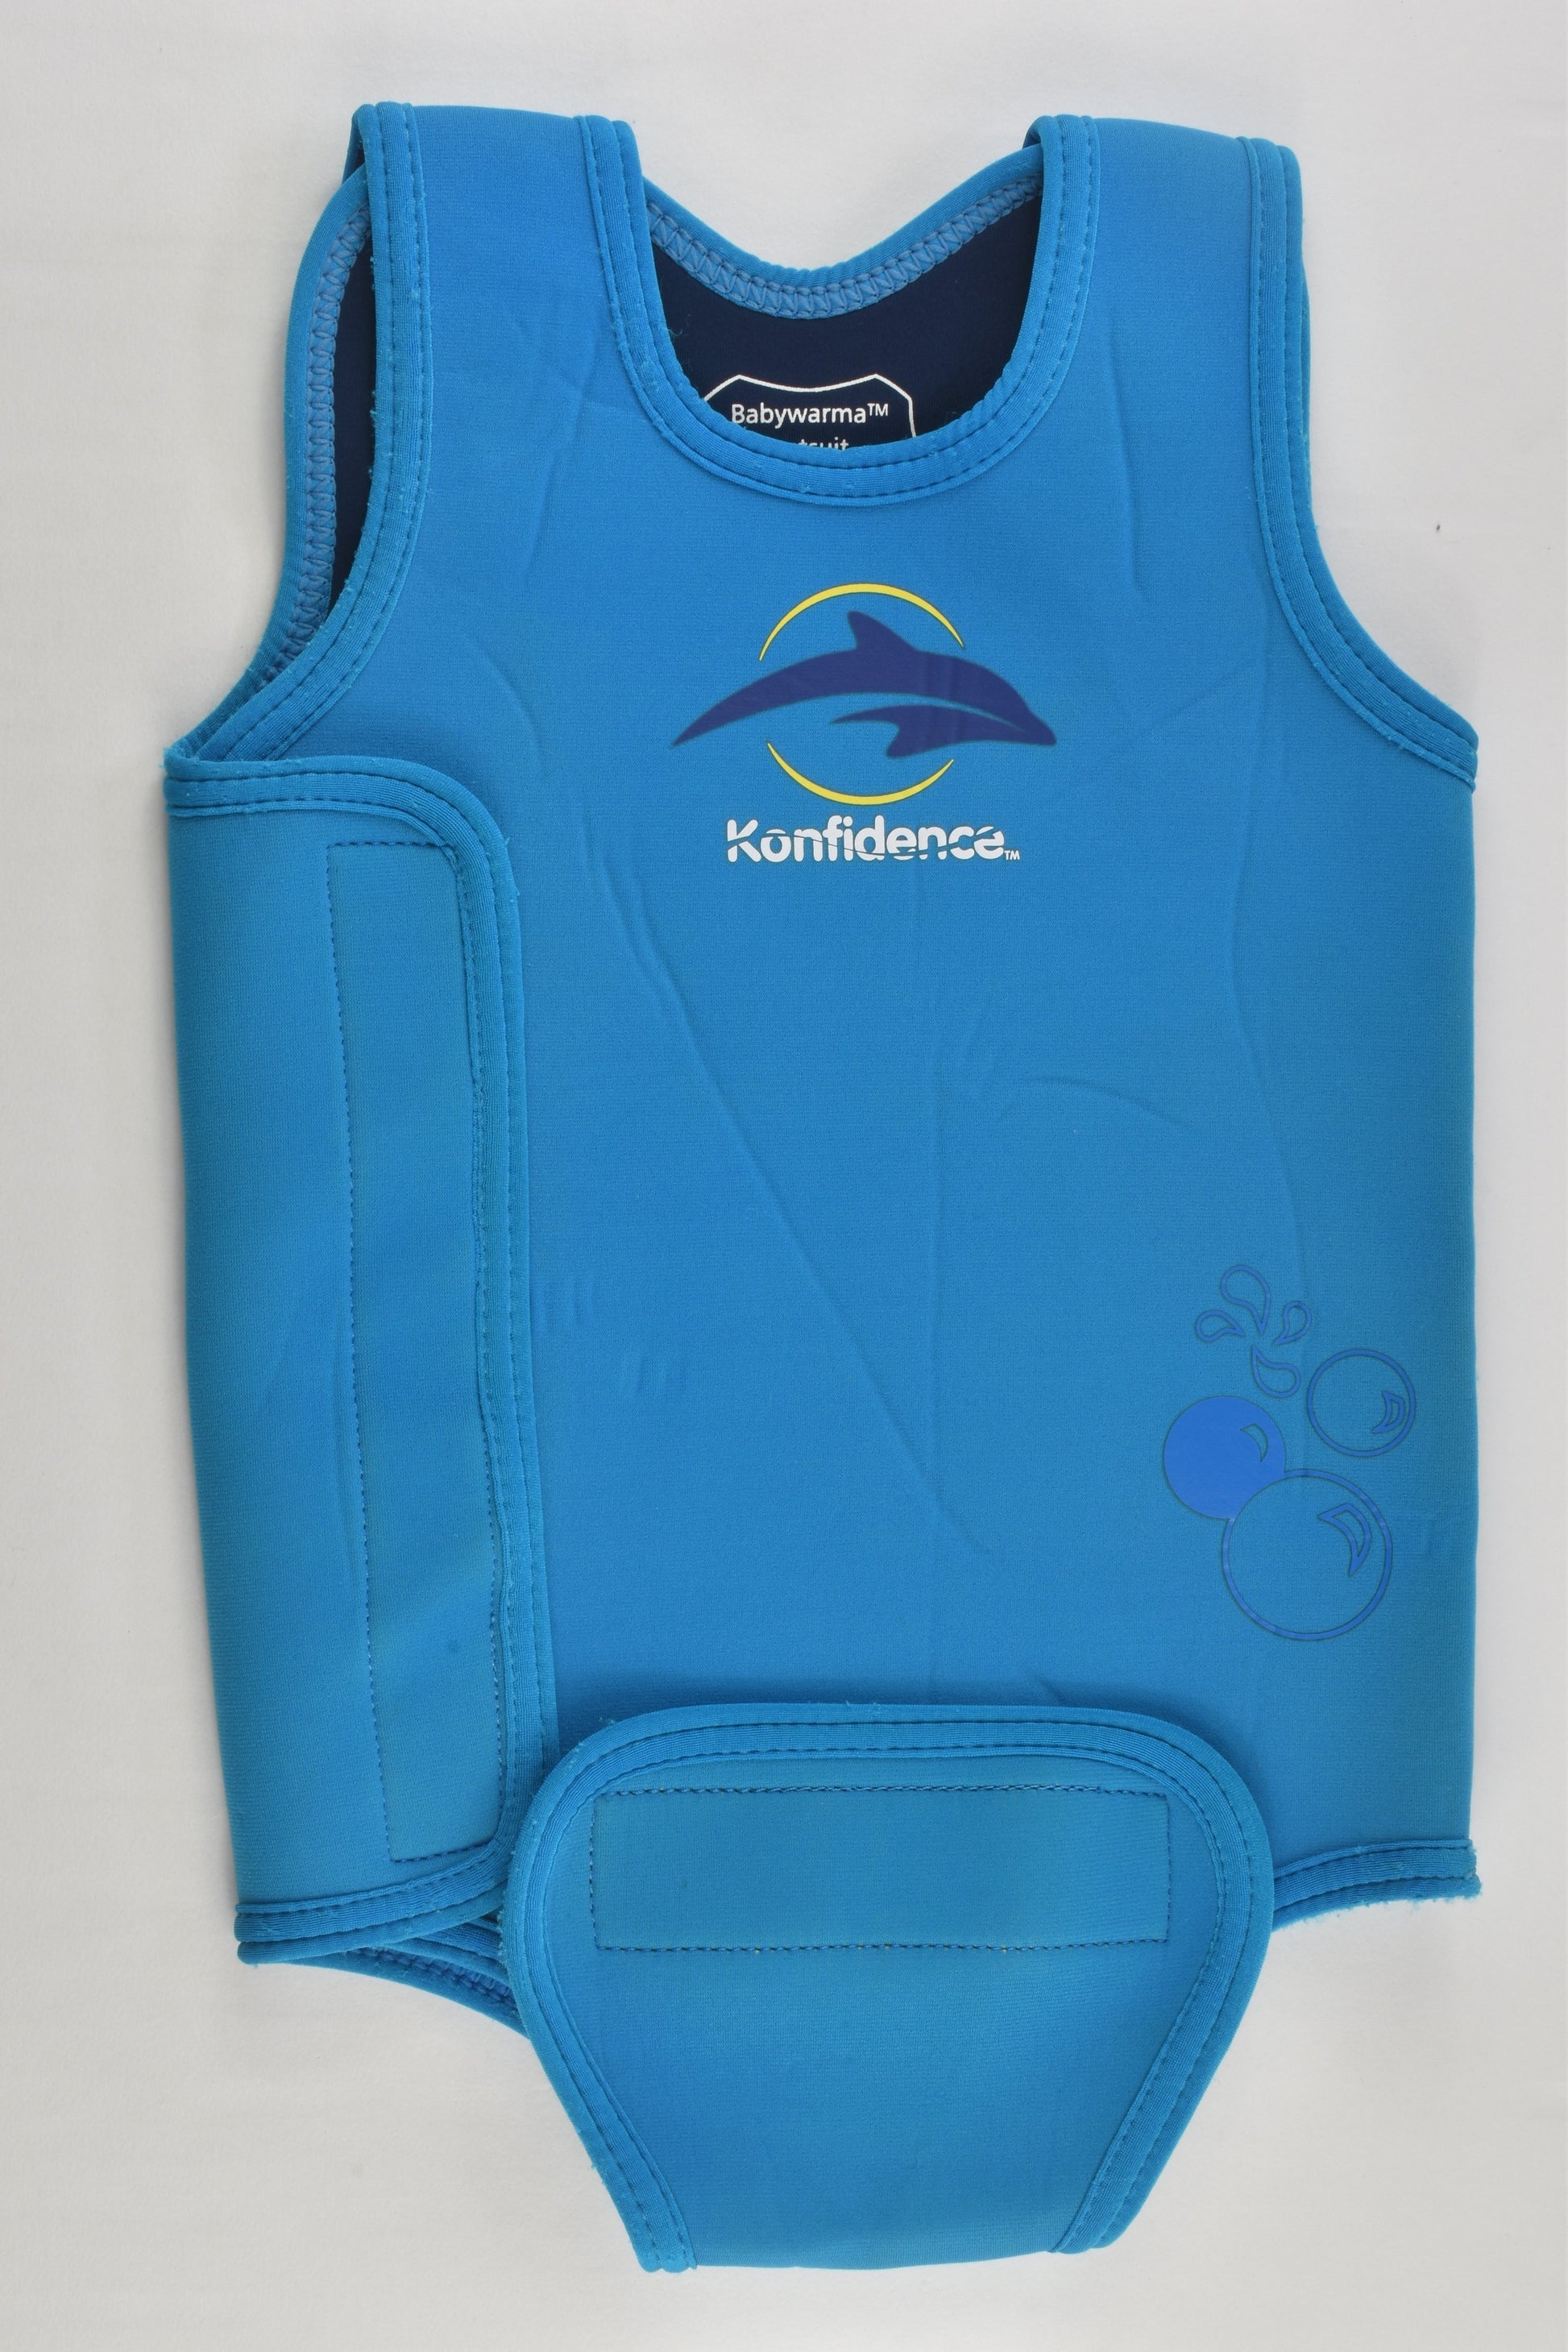 Konfidence Size 1-2 (12 to 24 months) Babywarma Wetsuit